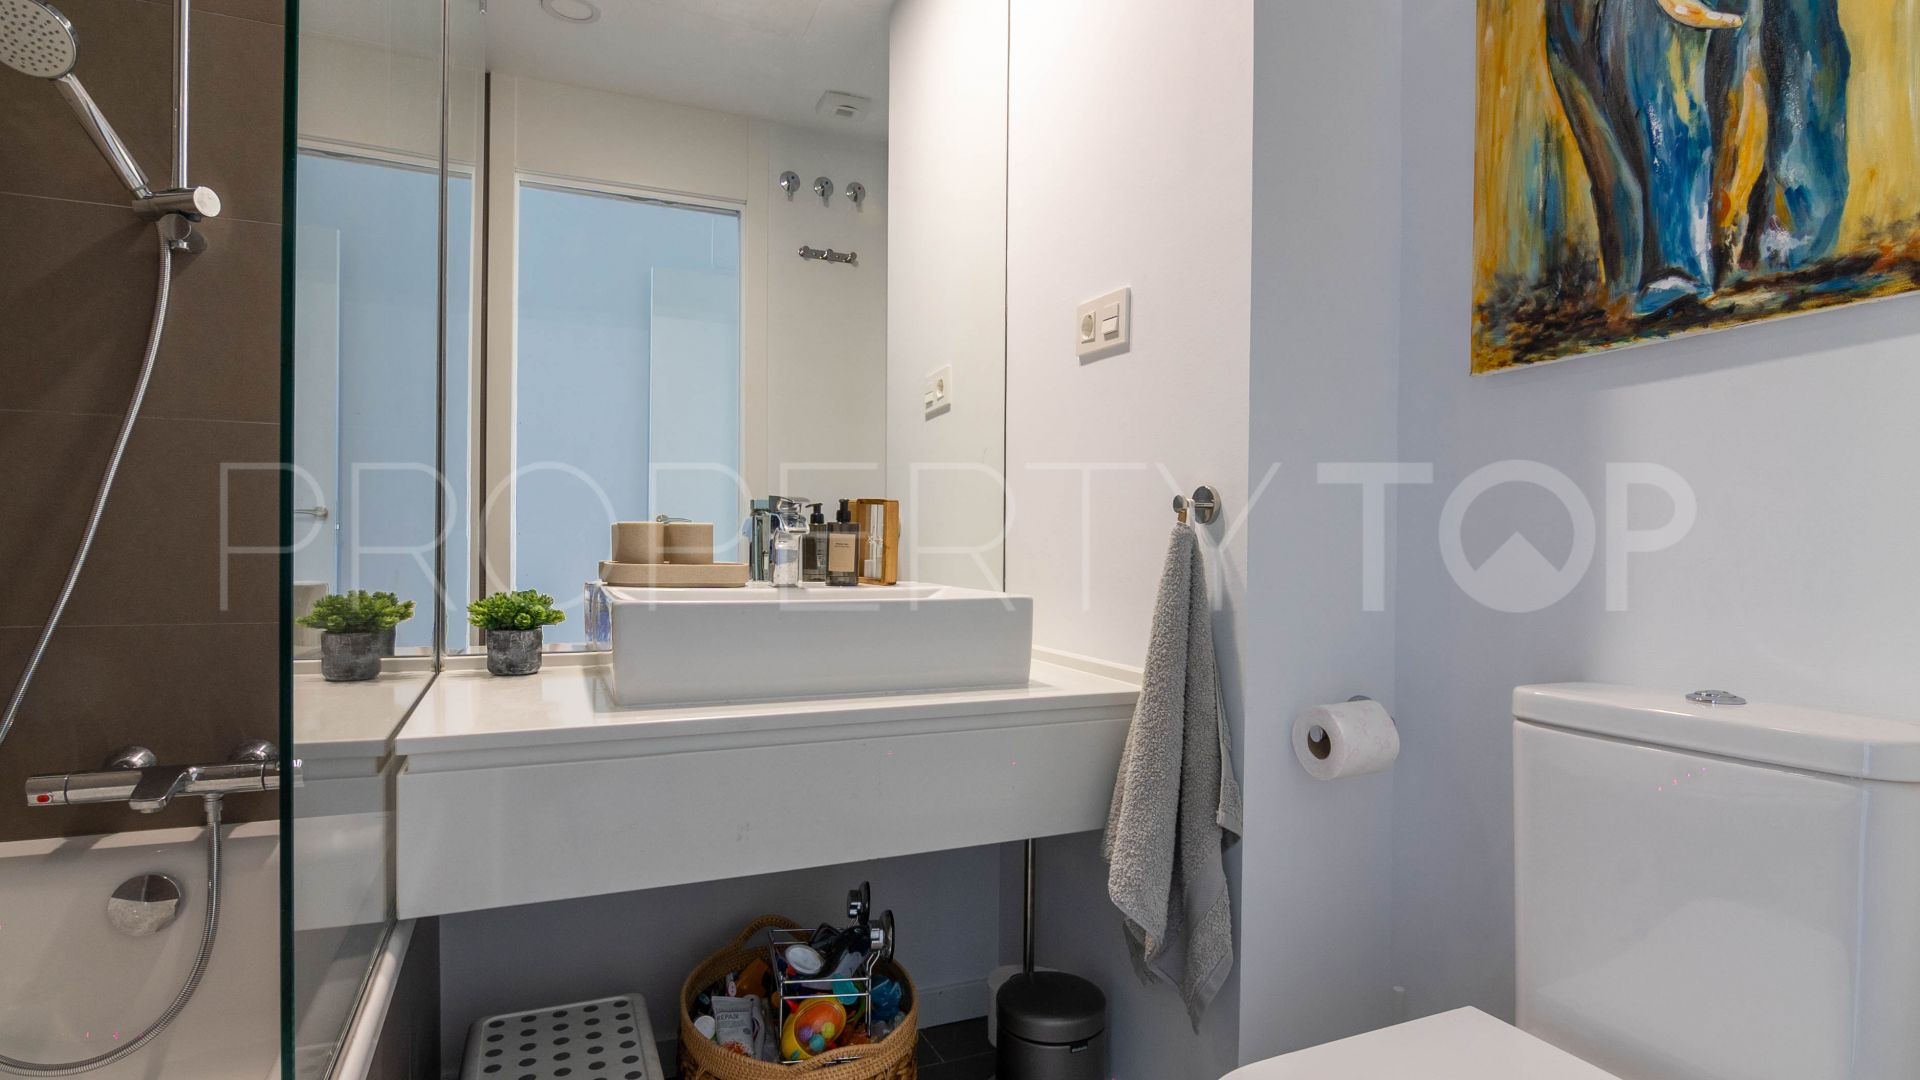 Cancelada 3 bedrooms apartment for sale